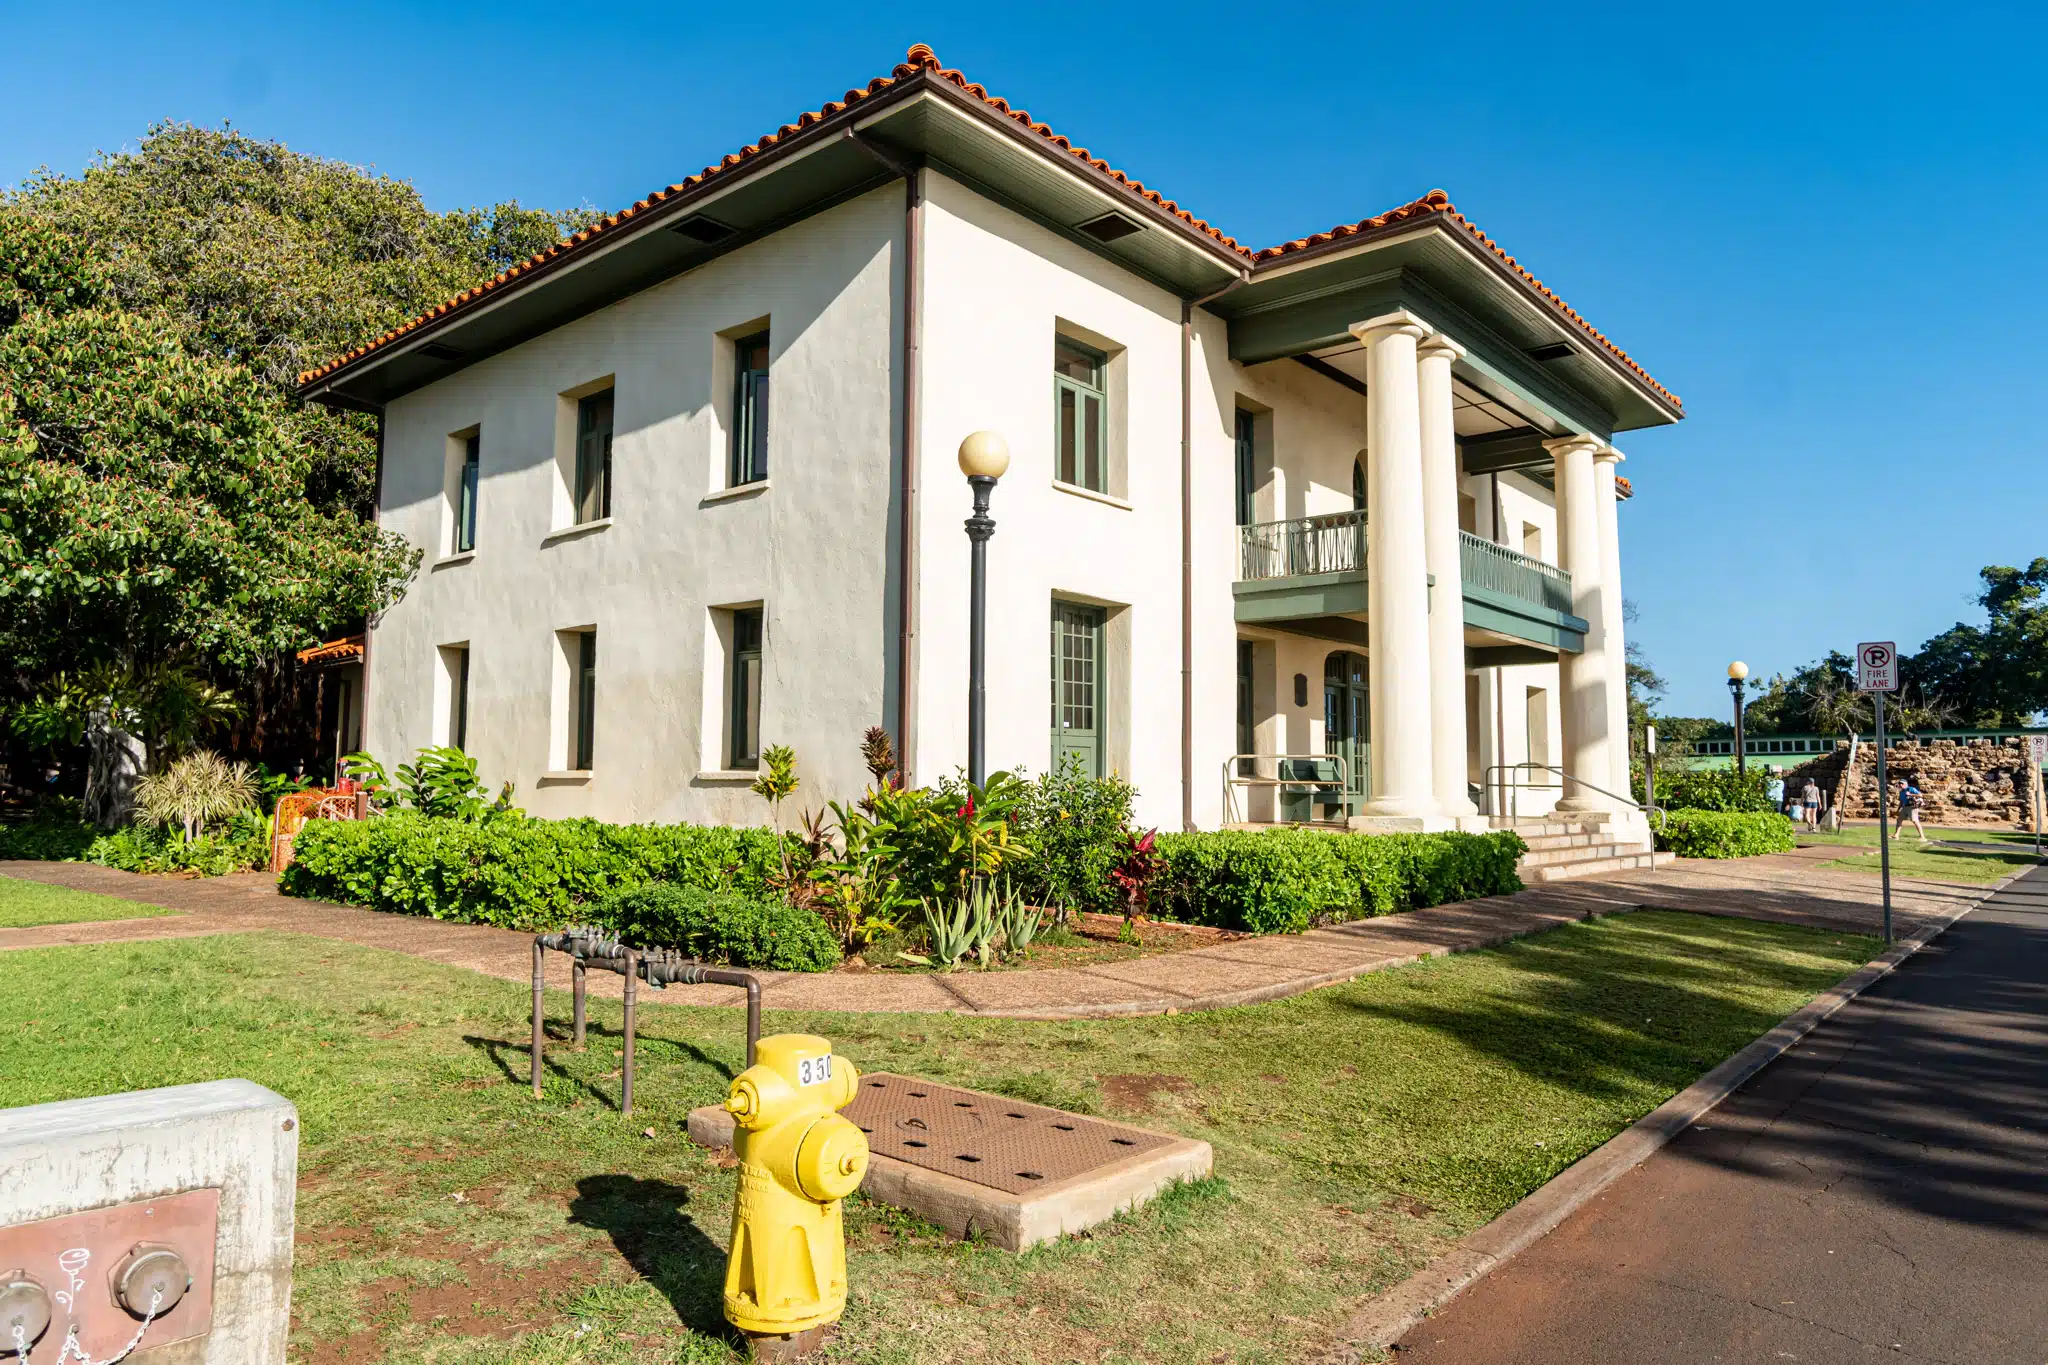 Old Lahaina Courthouse is a Heritage Site located in the city of Lahaina on Maui, Hawaii